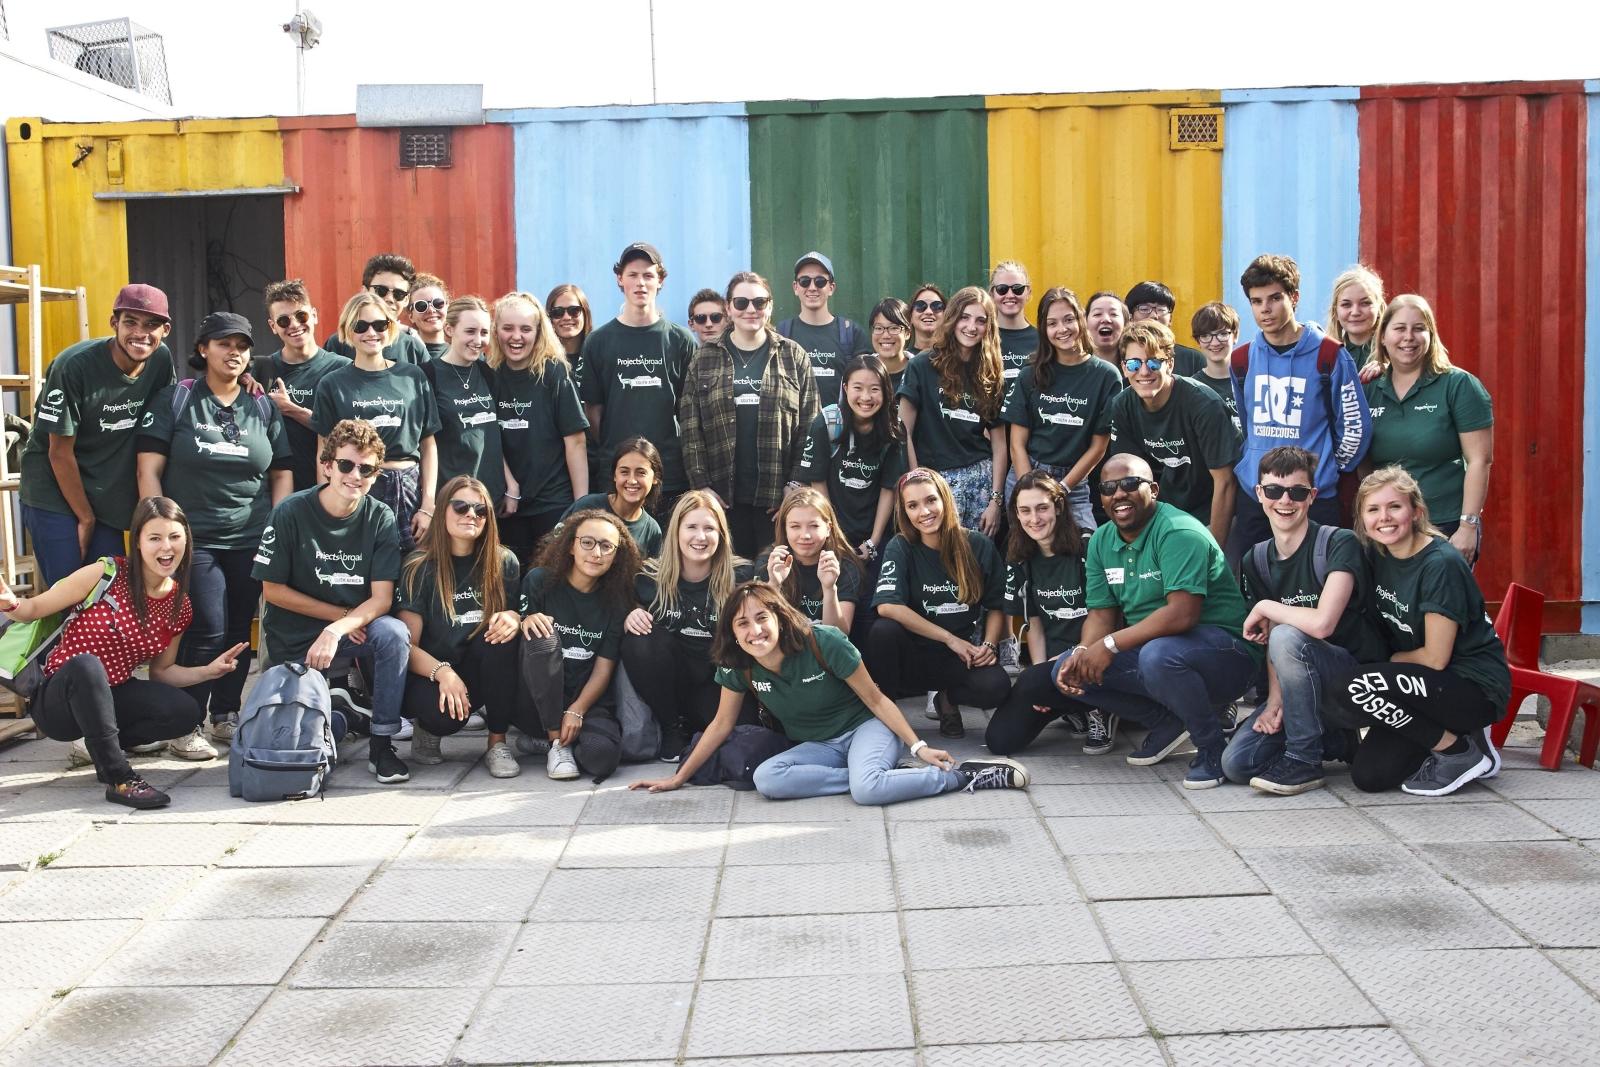 High school volunteer program abroad group photo in South Africa.